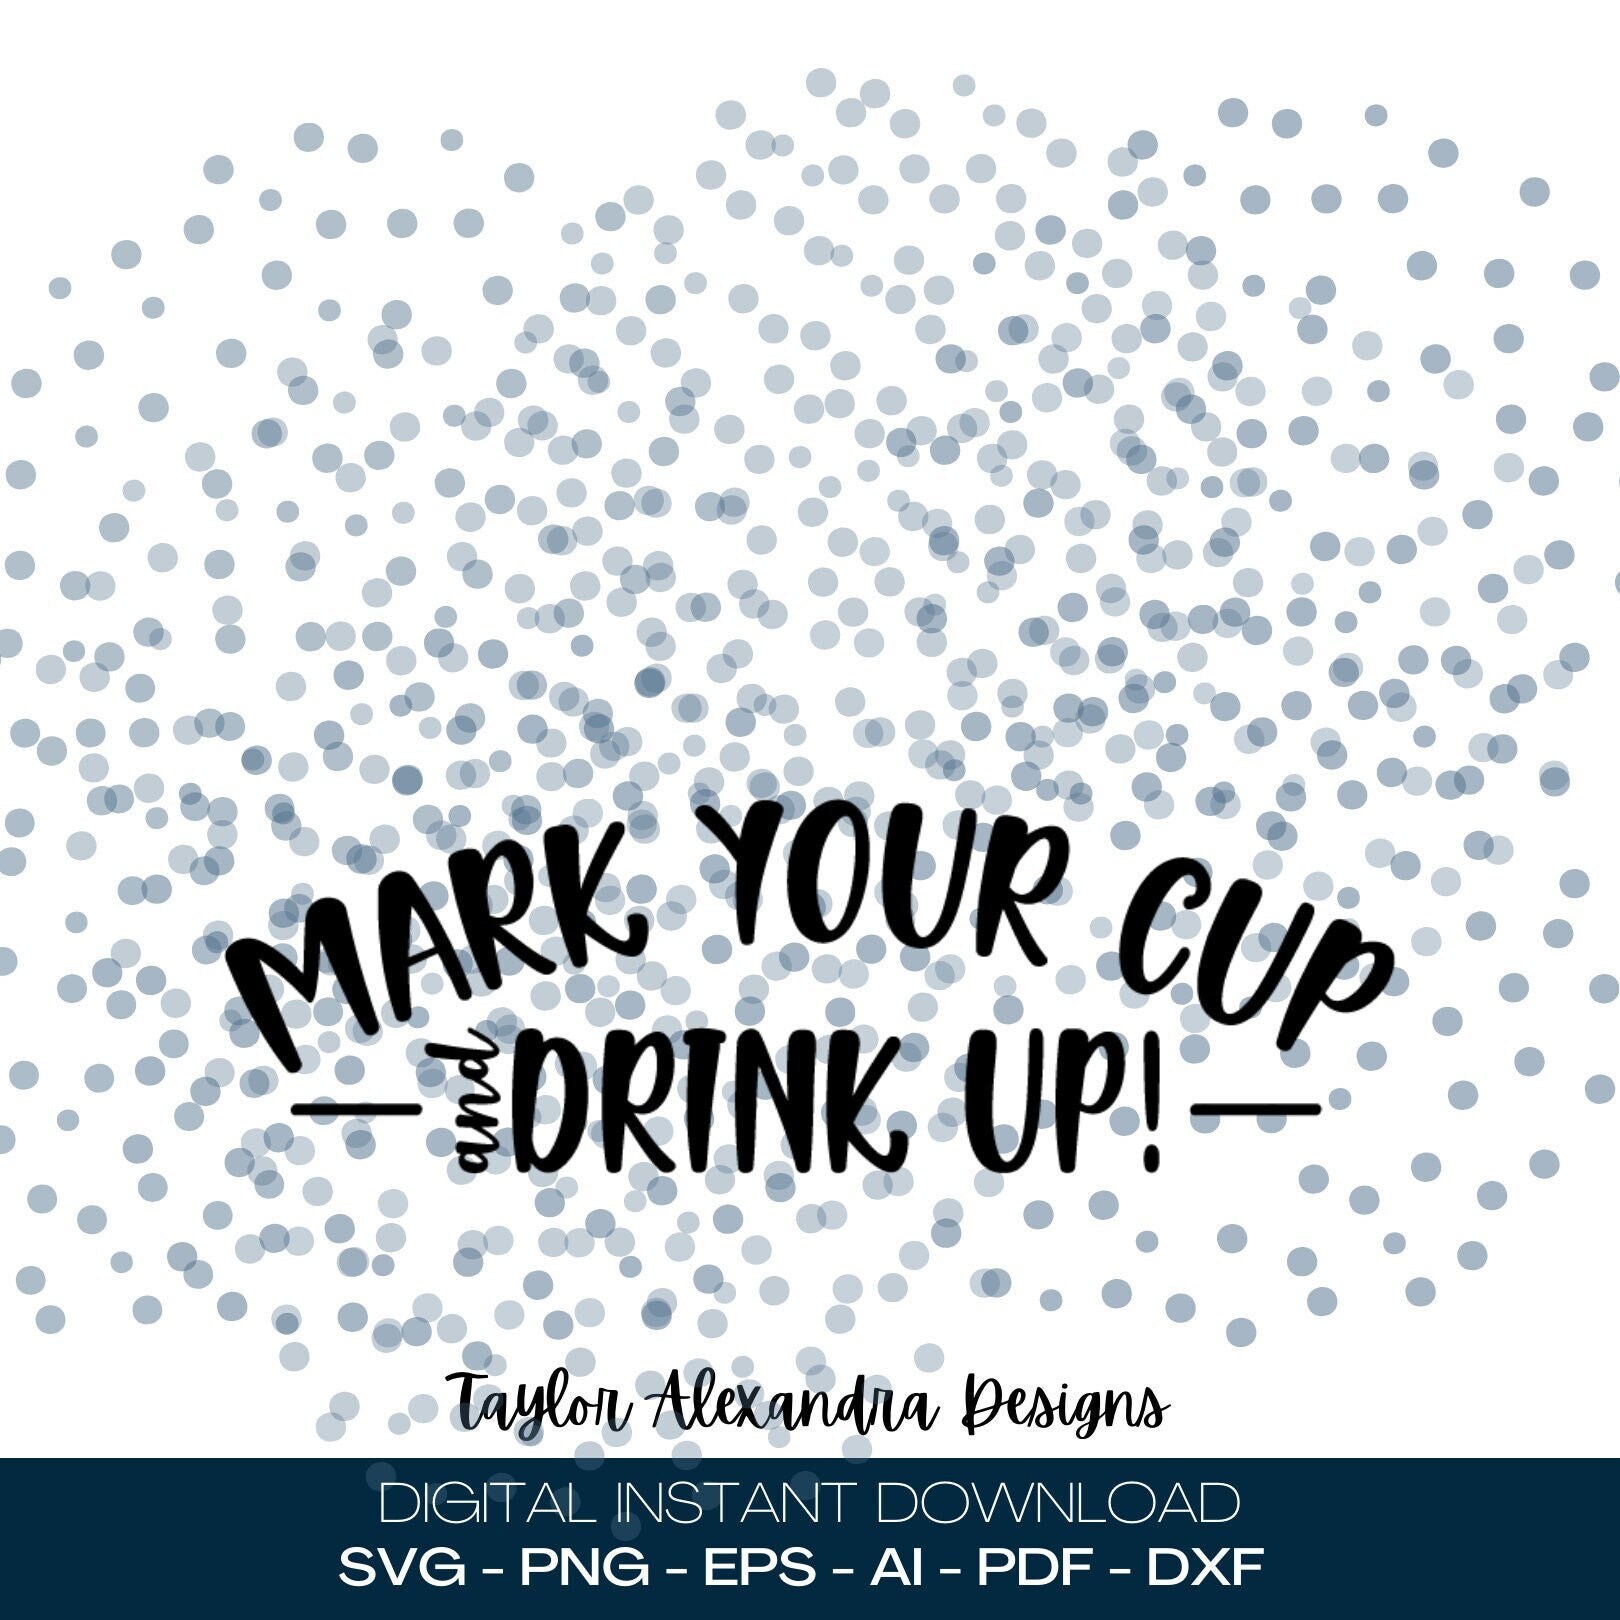 Red Cup svg - Party cup svg - Solo cup interpretation - beer pong cups -  beer glass - Red solo cup interpretation